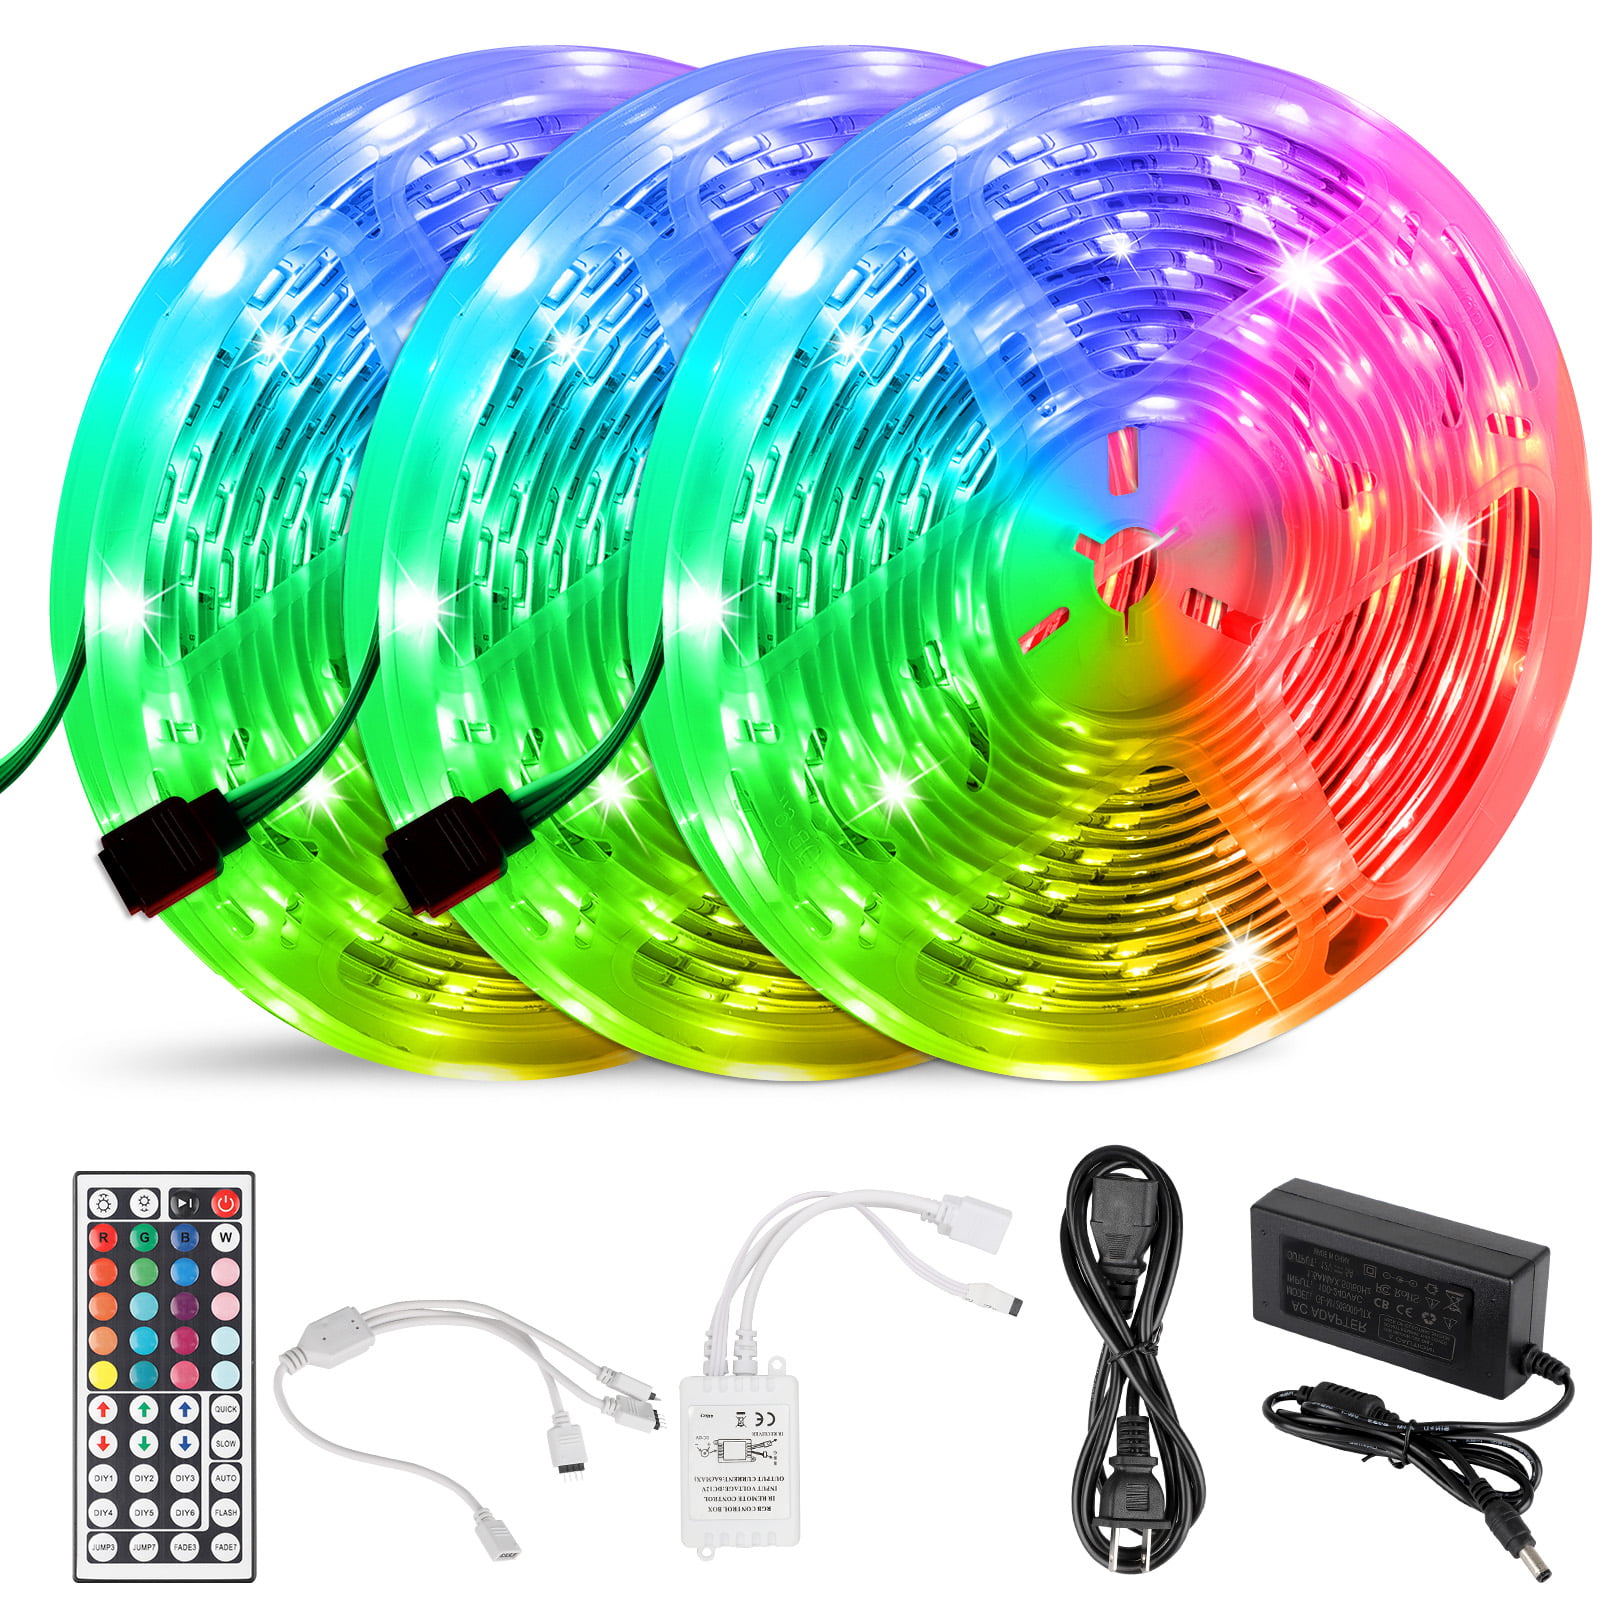 Luxled Multi color RGB Storefront Led Lights Strip Plug N Play All in One Kit. 